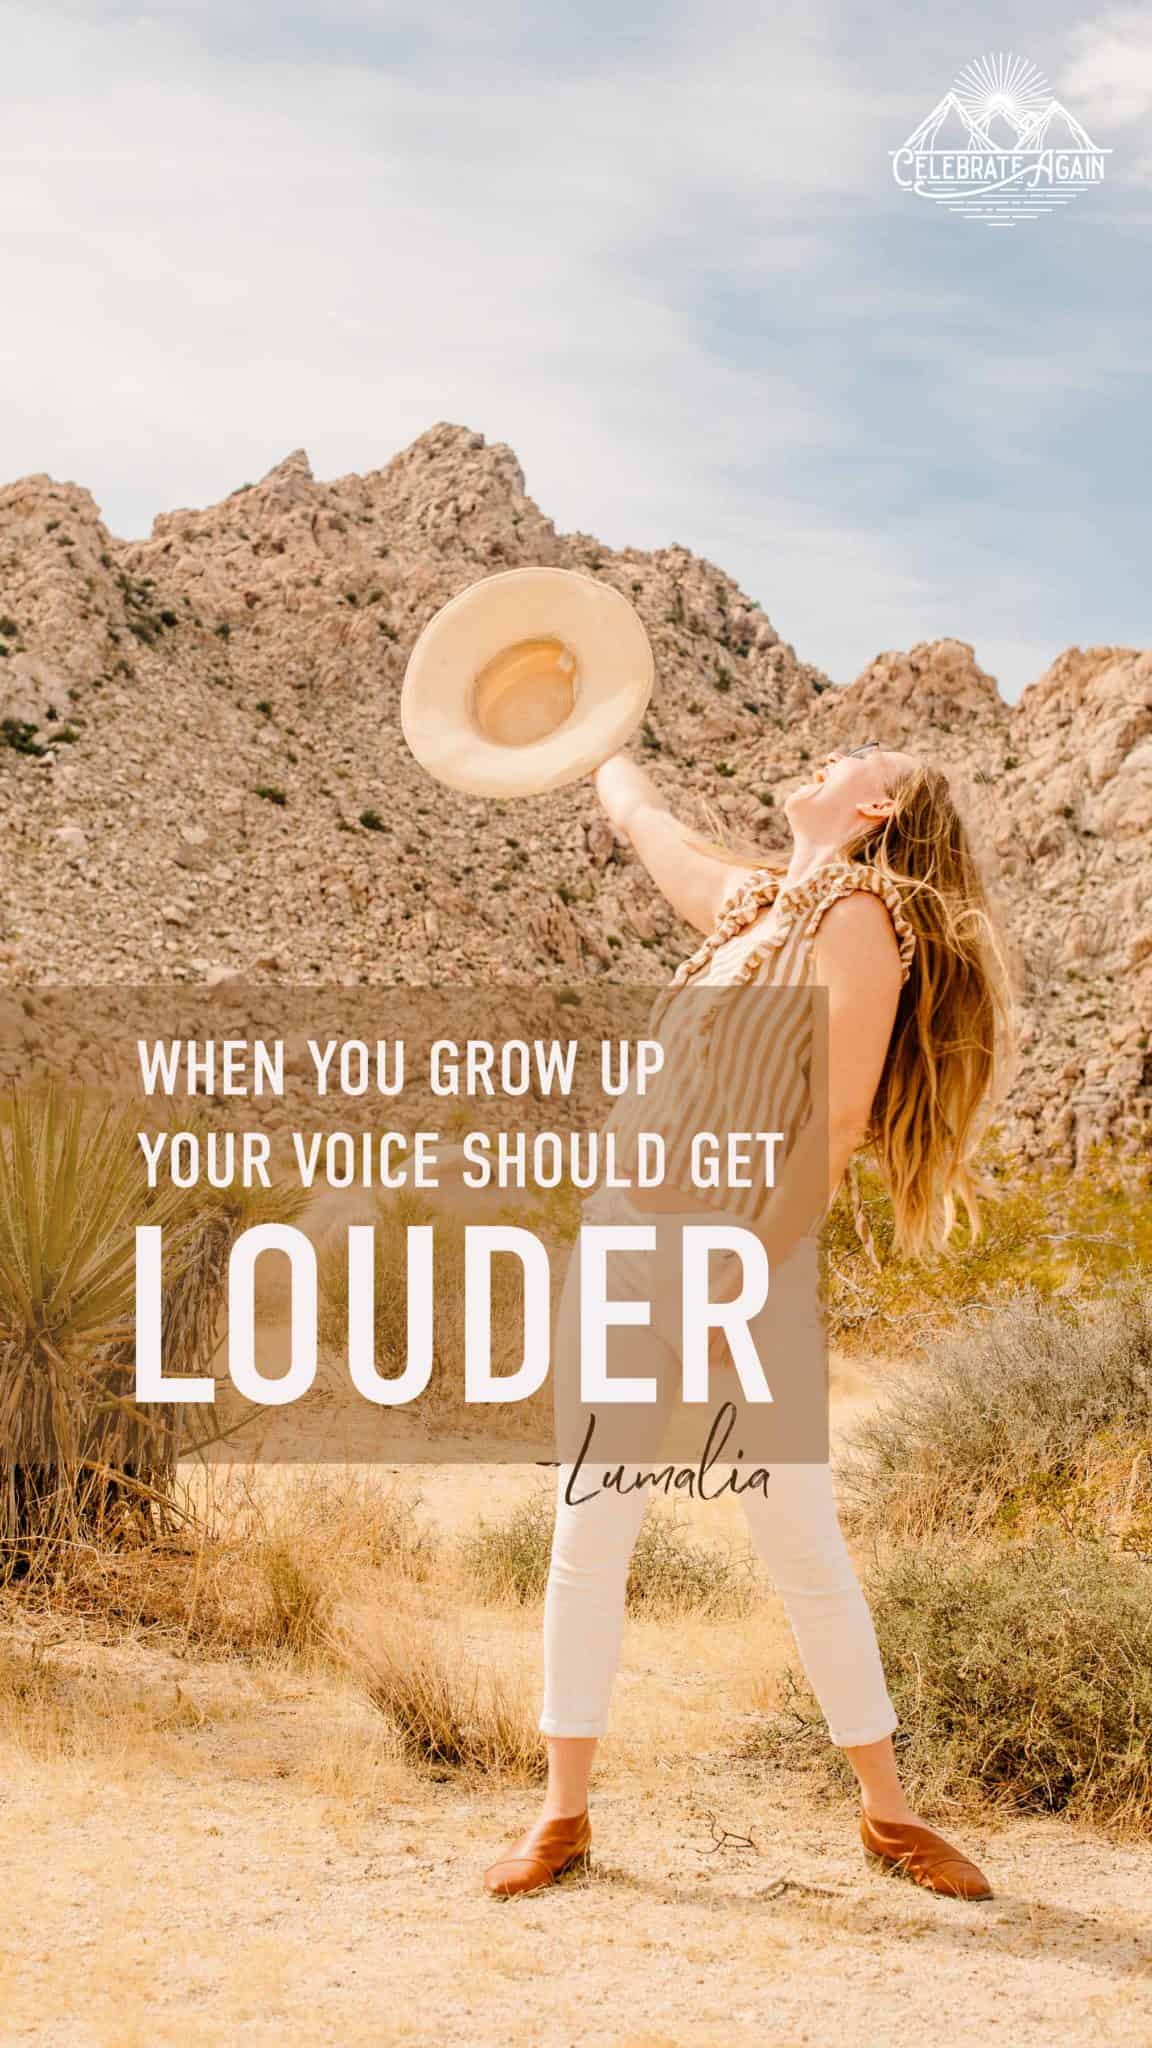 "when you grow up your voice should get louder" Lumalia standing with arms open and shouting with a hat in her hand by a desert landscape